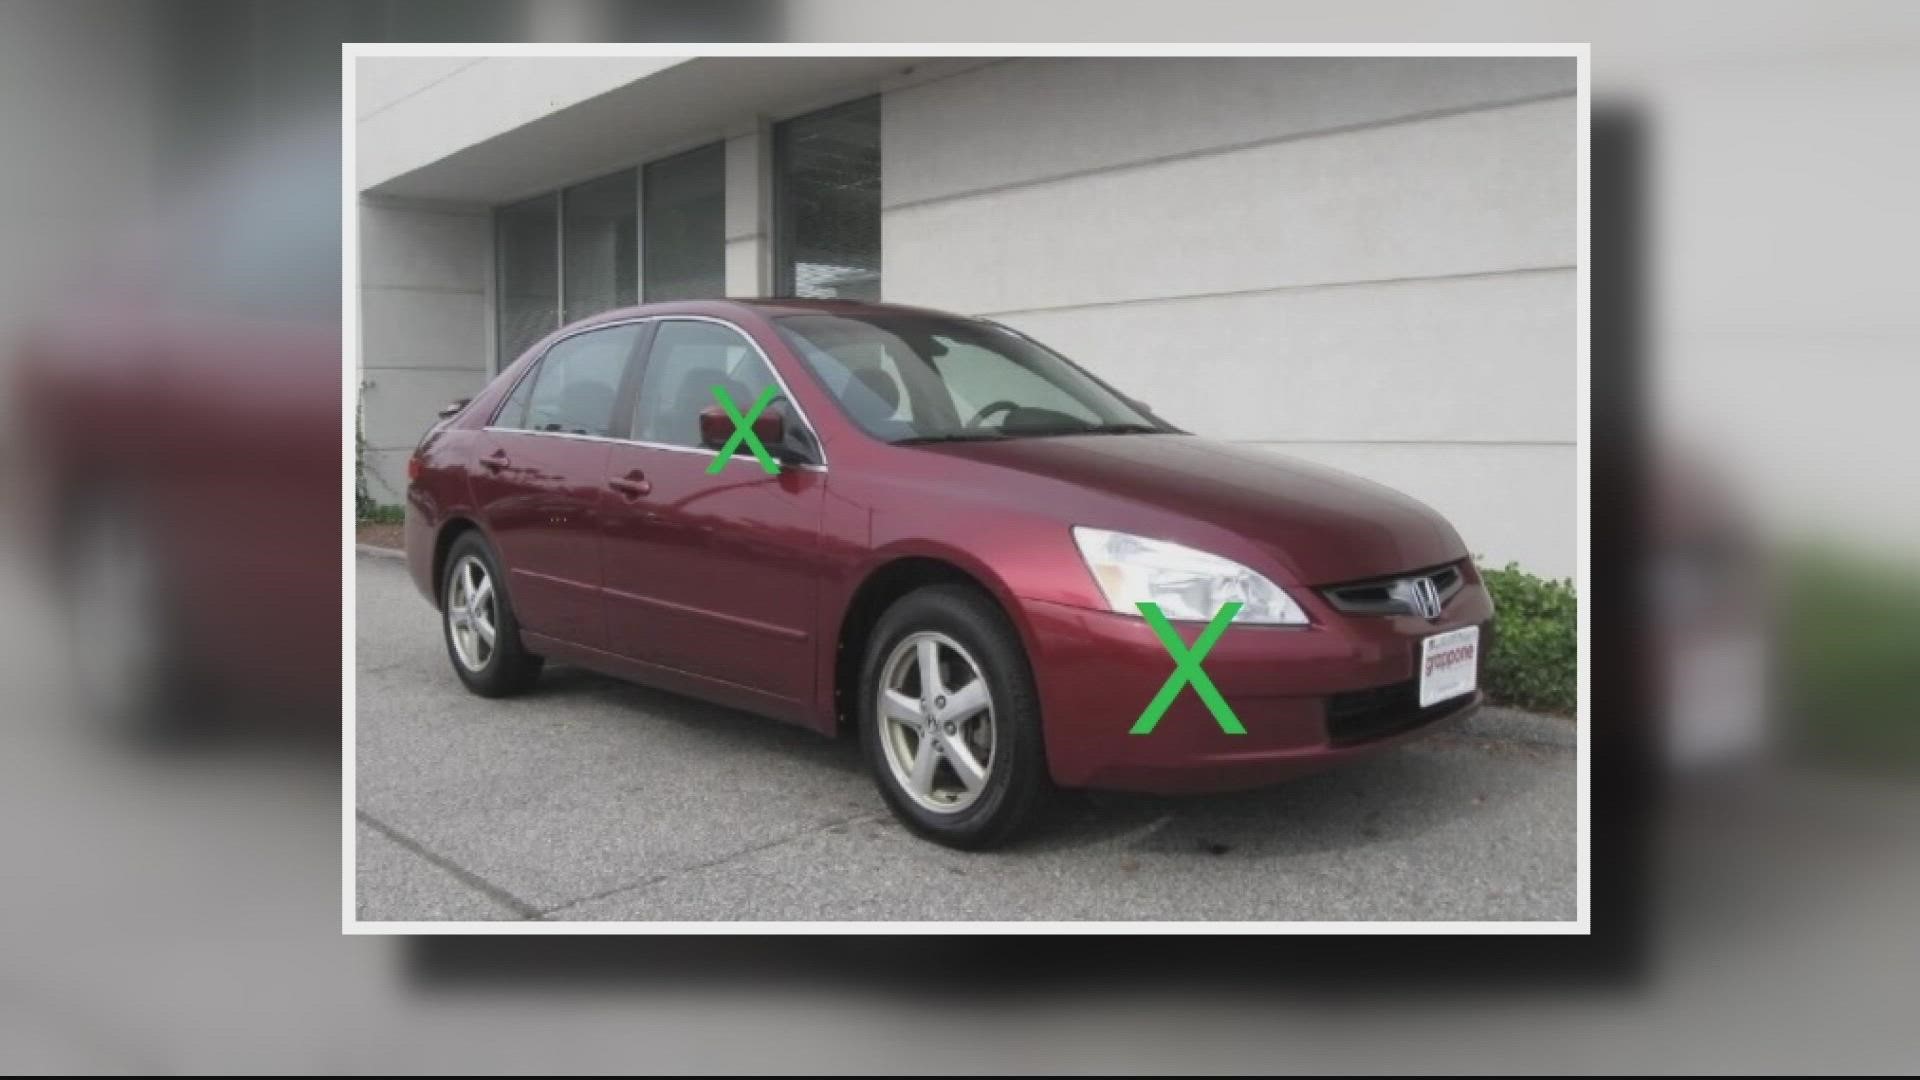 Police release a photo of a similar vehicle in hopes of finding the driver.